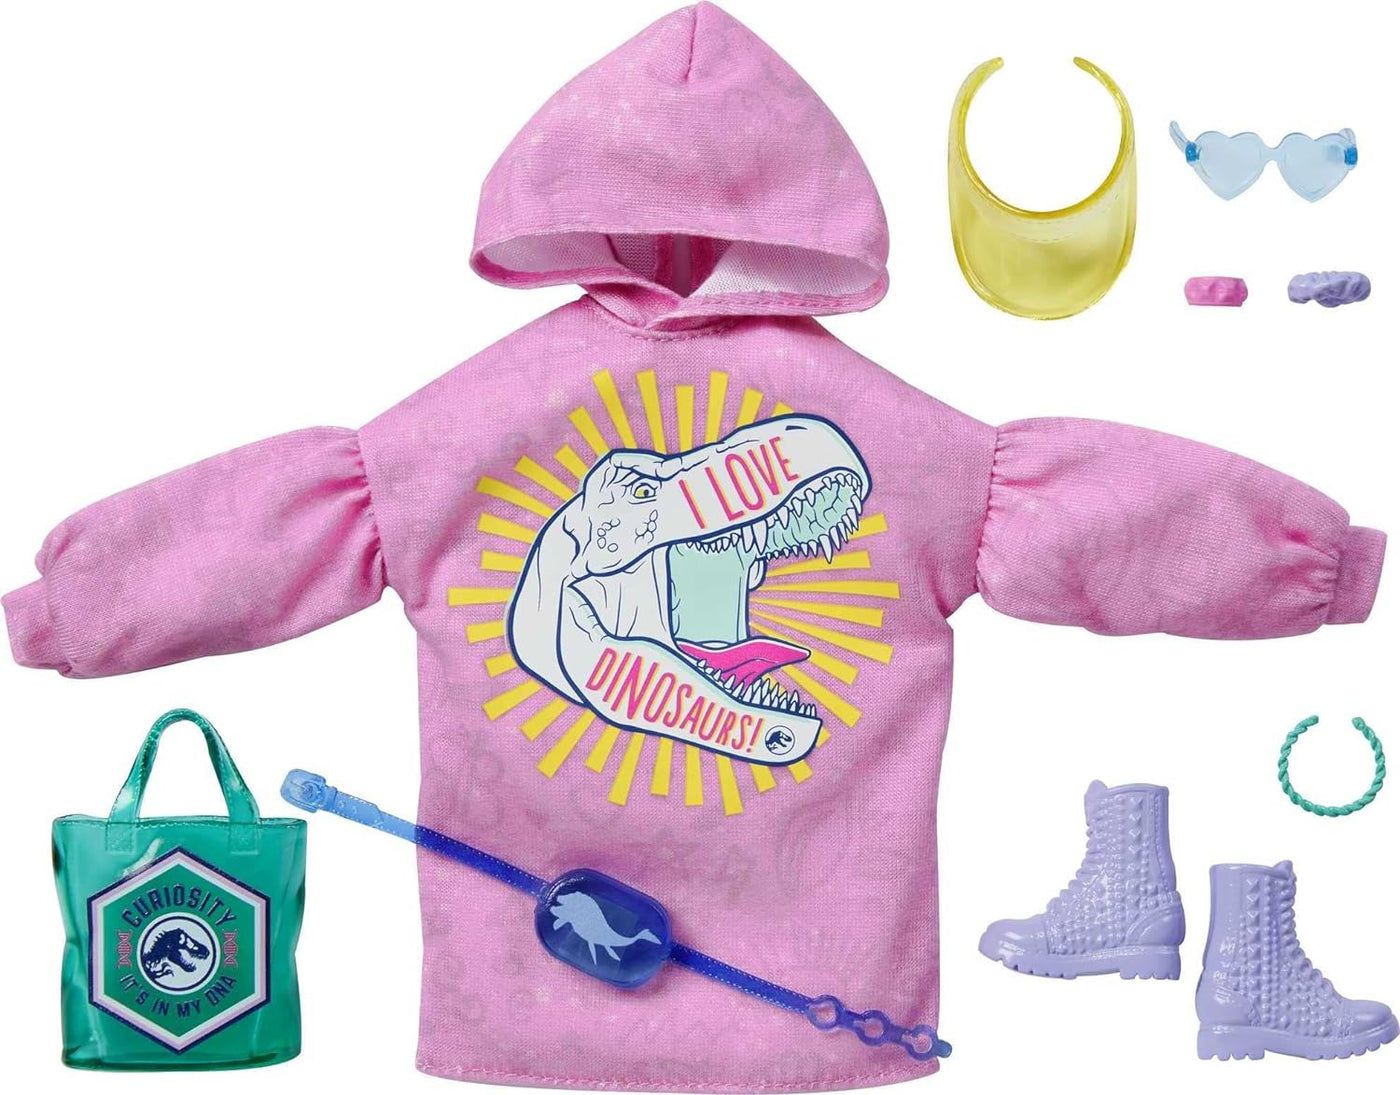 Barbie Clothing & Accessories Inspired by Jurassic World with 9 Storytelling Pieces for Barbie Dolls: Sweatshirt Dress with Dinosaur Graphic, Purple Boots, Fanny Pack, Heart-Shaped Sunglasses, 3-8Y